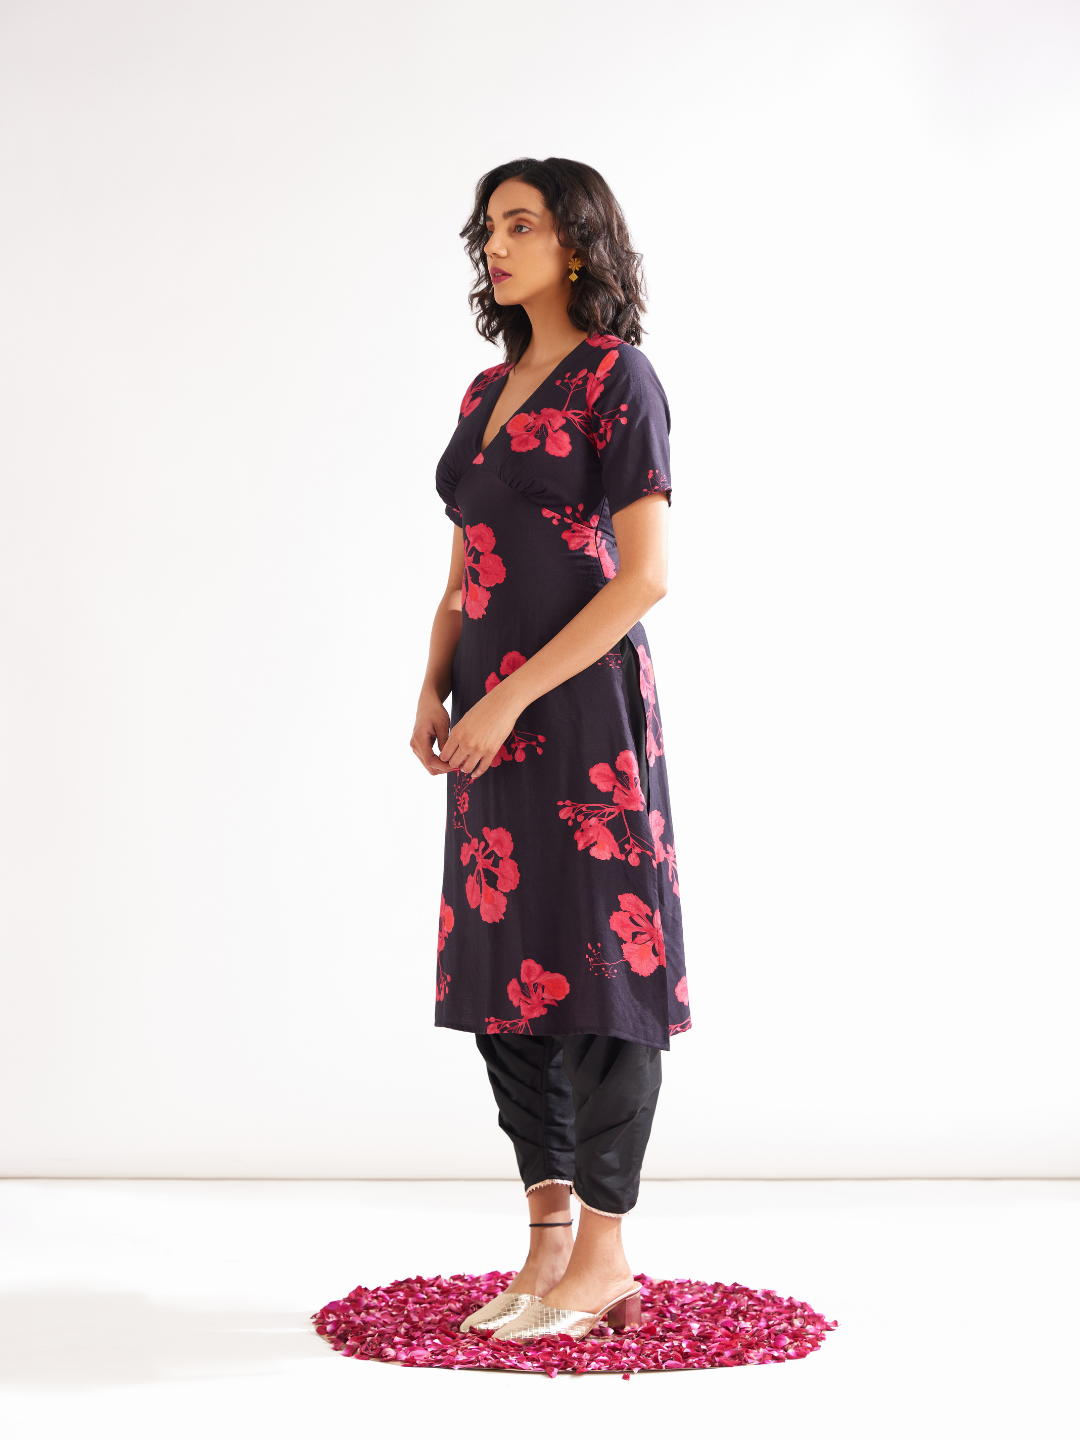 Gulmohar back tie-up kurta Paired with side pleated dhoti along with dupatta- Rich black